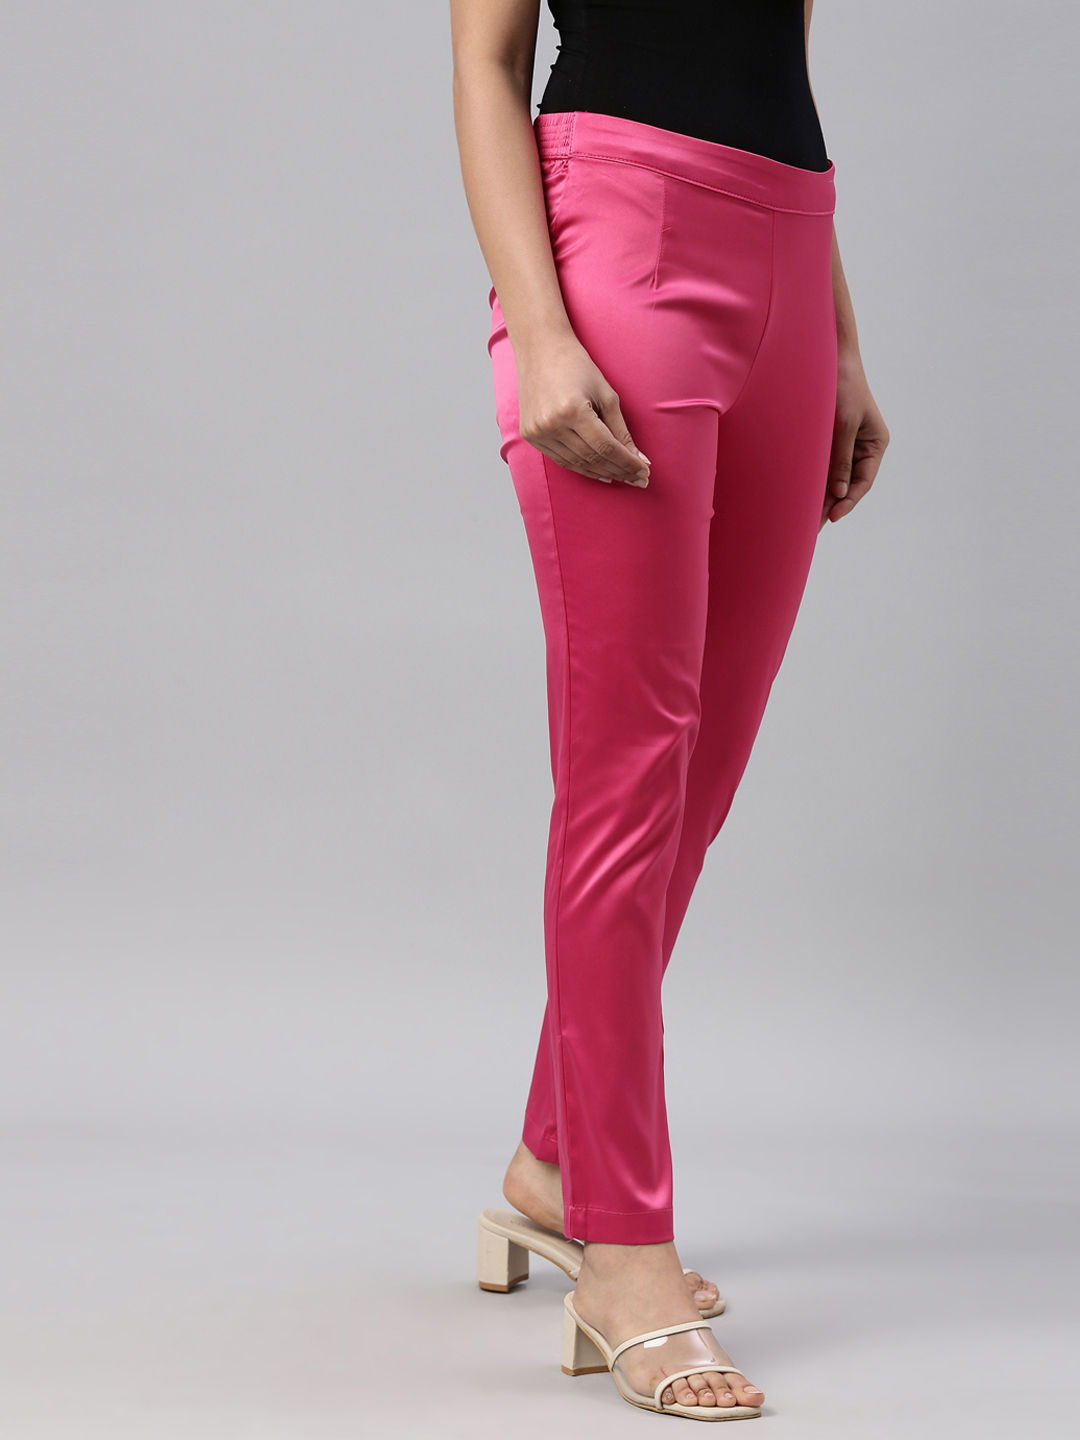 Buy NOT SO PINK Dark Pink Solid Polyester Regular Fit Women's Pants |  Shoppers Stop